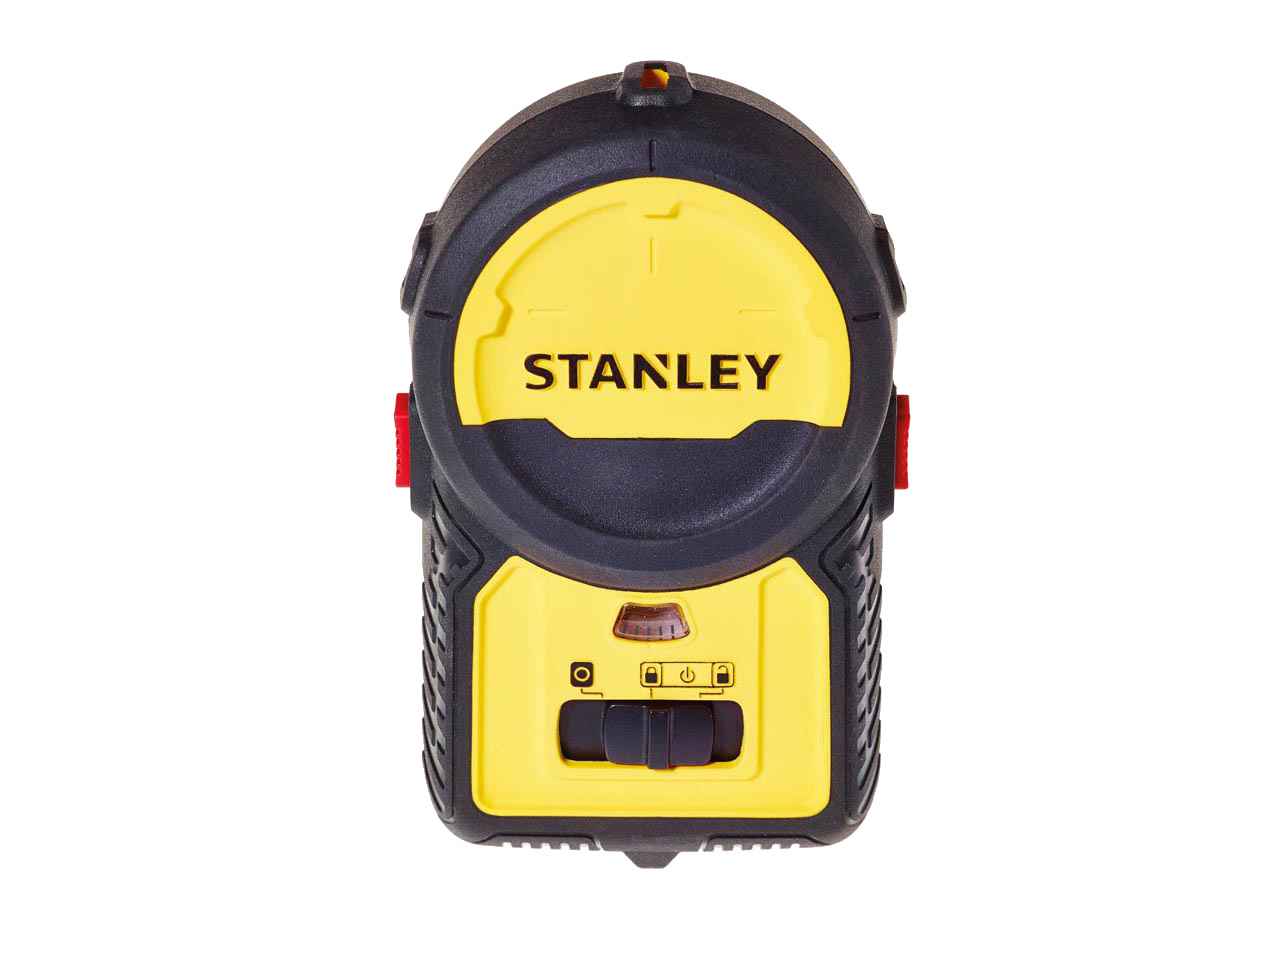 Stanley 177149 auto nivellement wall laser